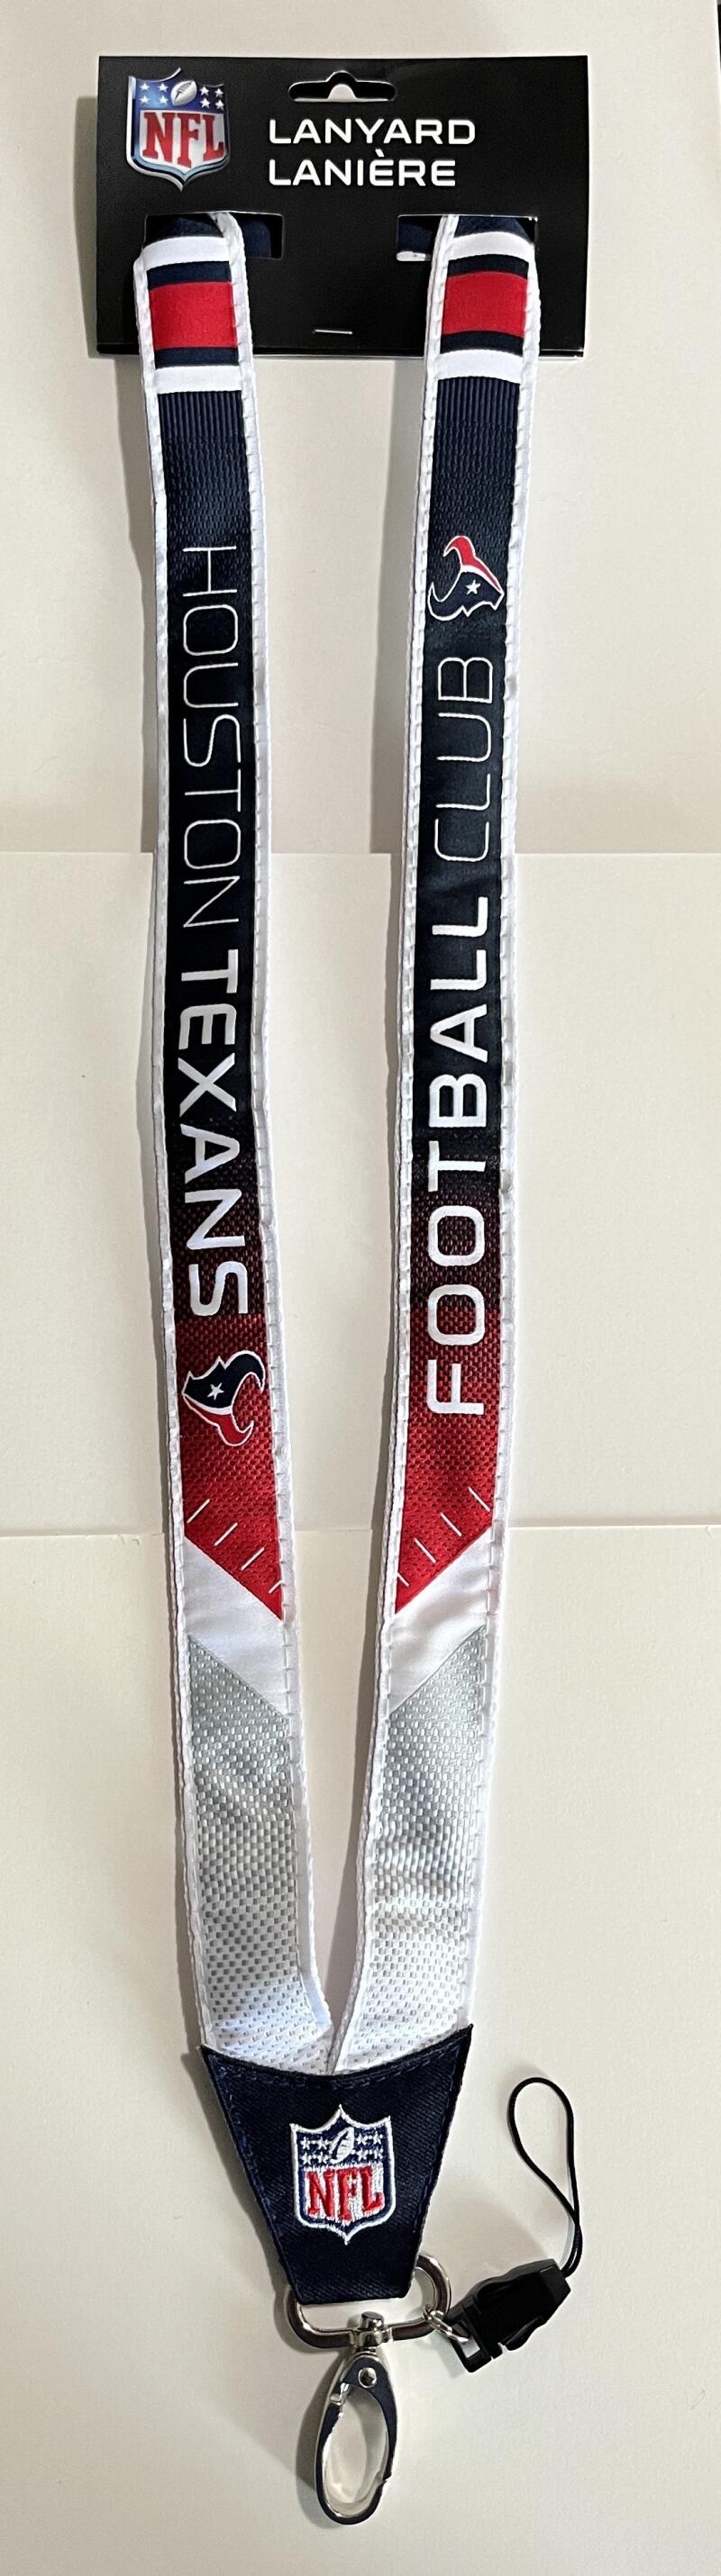 Houston Texans Woven Licensed NFL Football Lanyard Metal Clasp Image 1